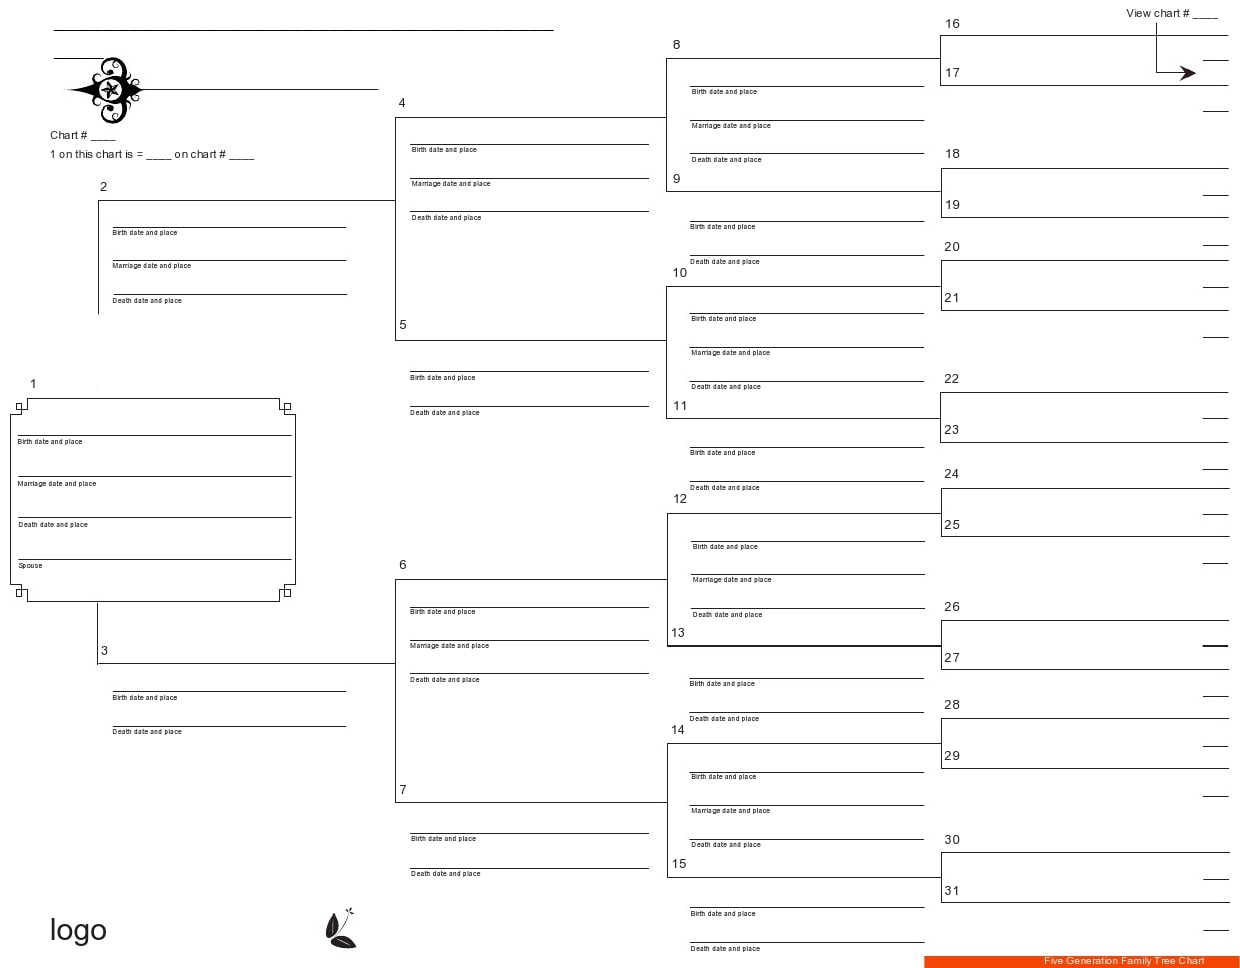 20 Editable Family Tree Templates [20% Free] - TemplateArchive Intended For Blank Tree Diagram Template